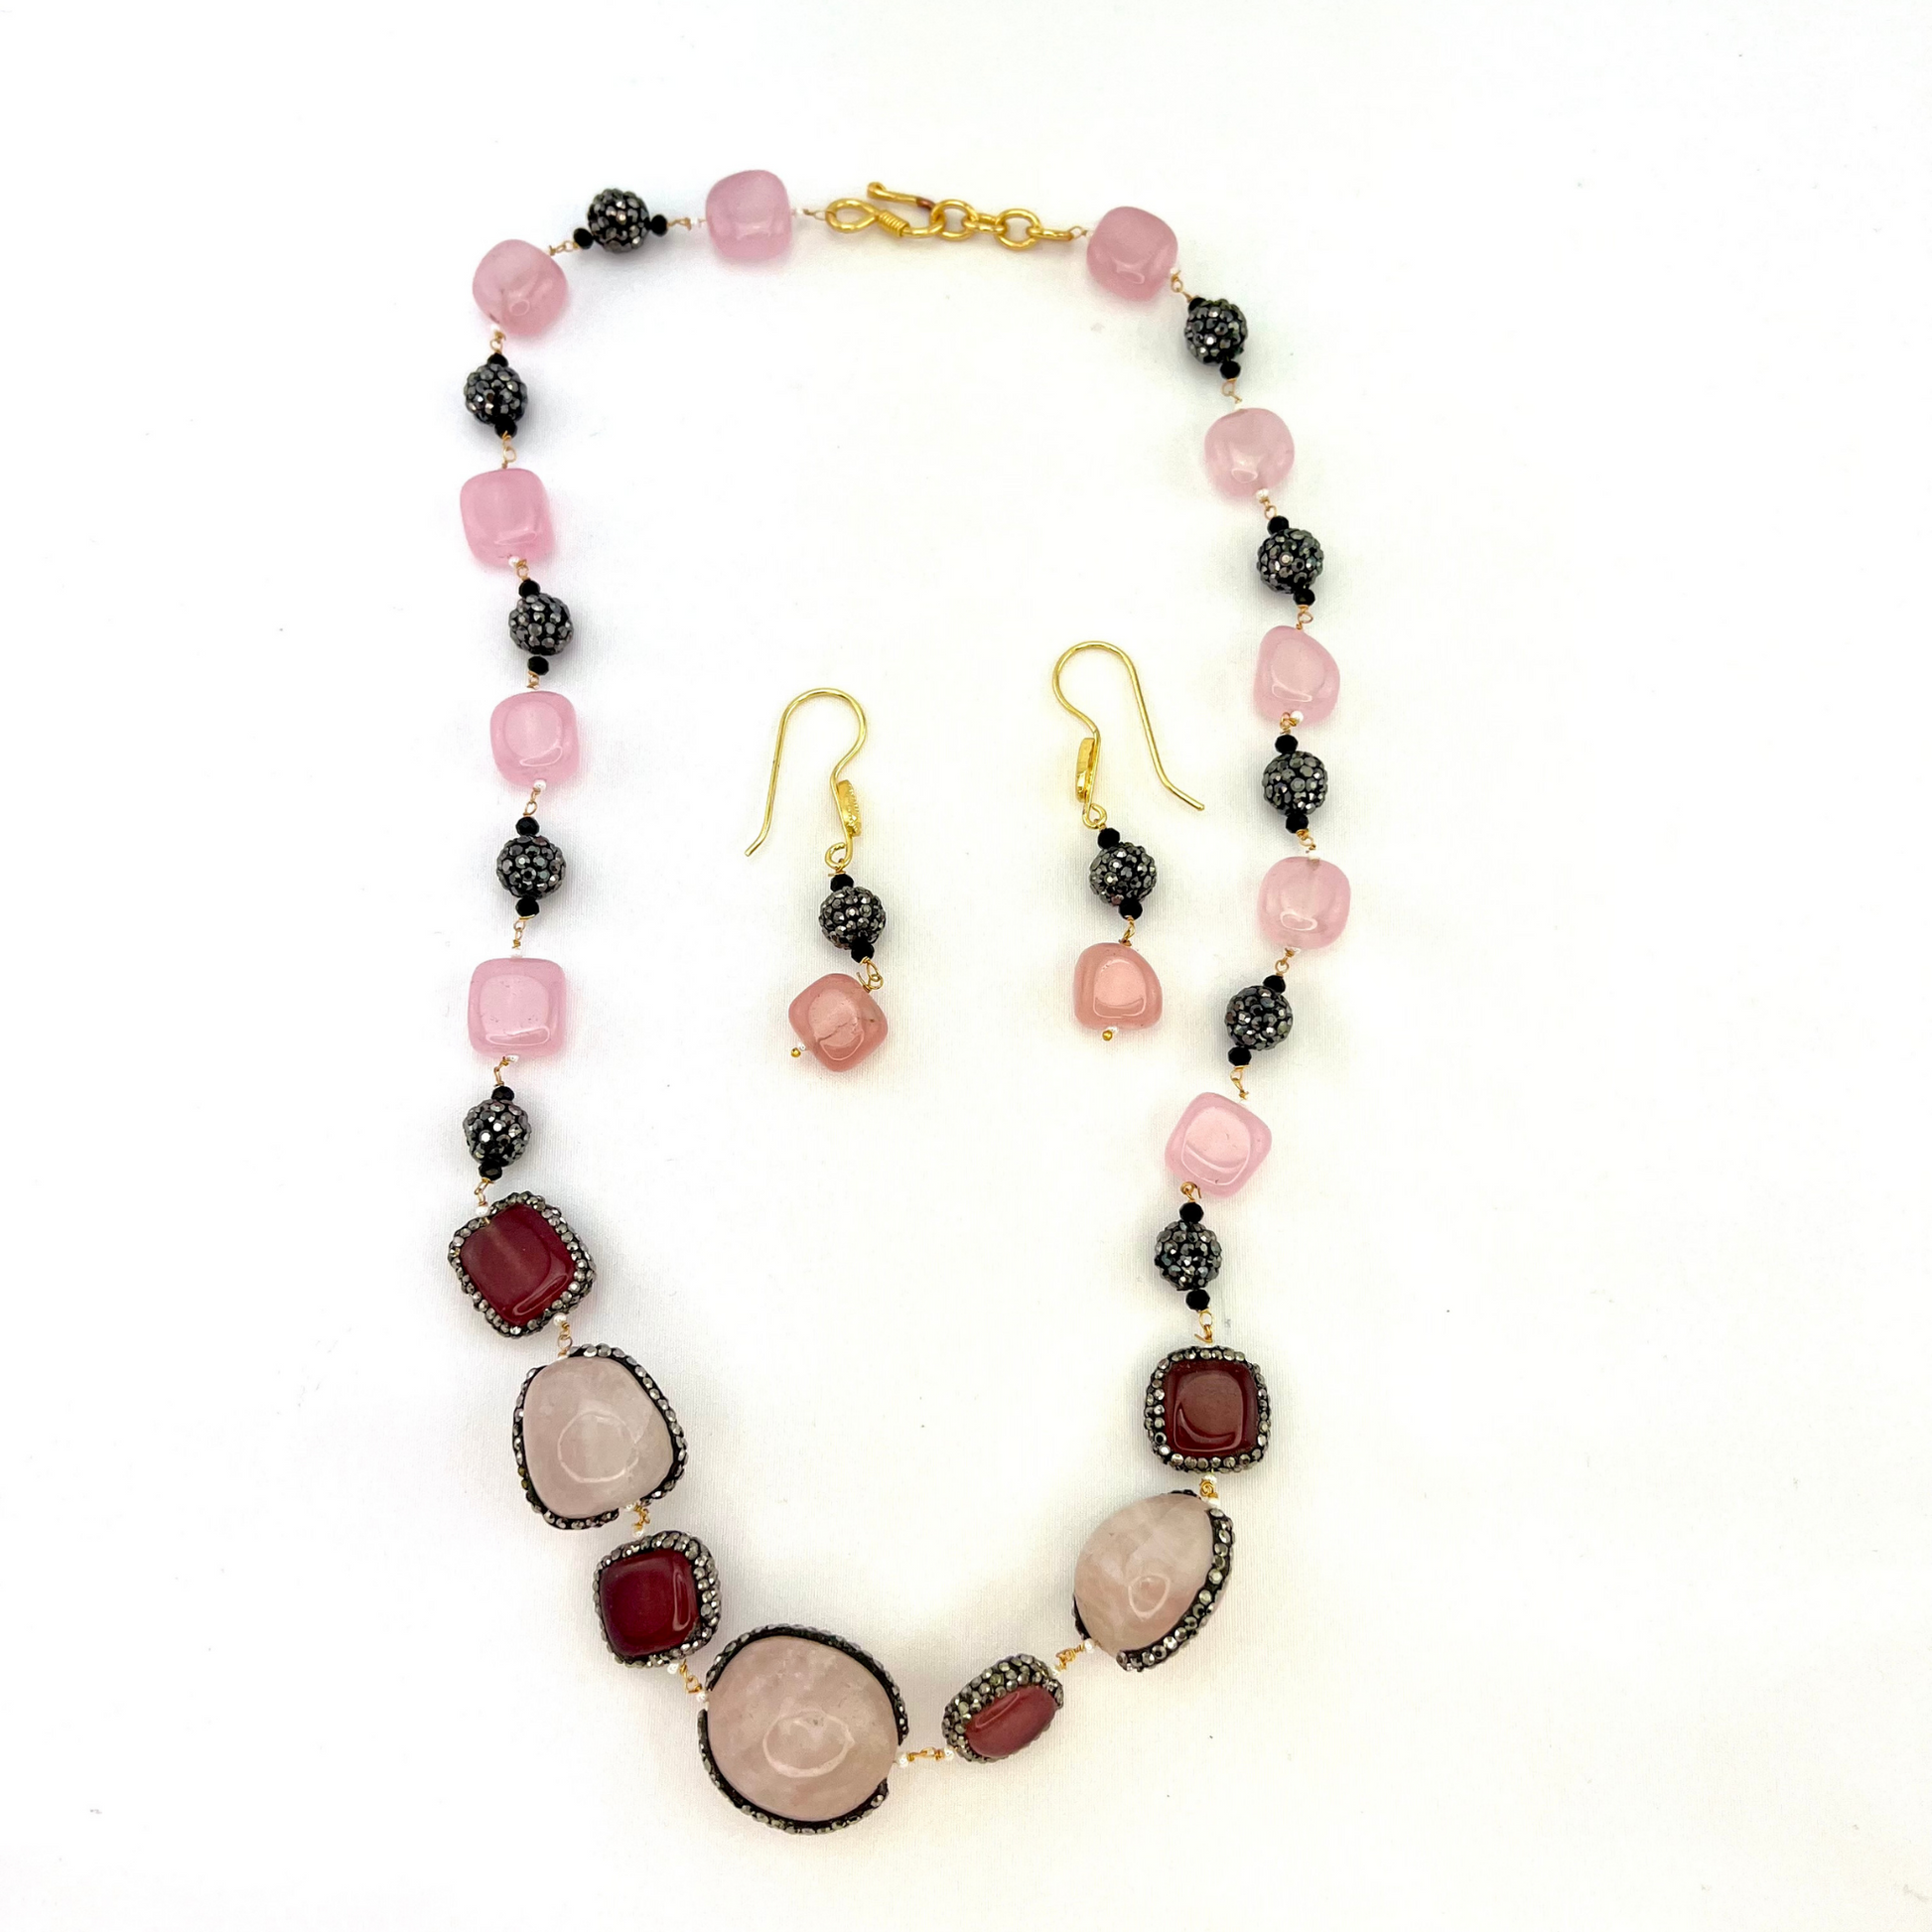 Long necklace set with large stones and beads.  Set includes necklace & earrings.  Prefect for Indian parties, weddings and special occasions.   Latest 2022 fashion.